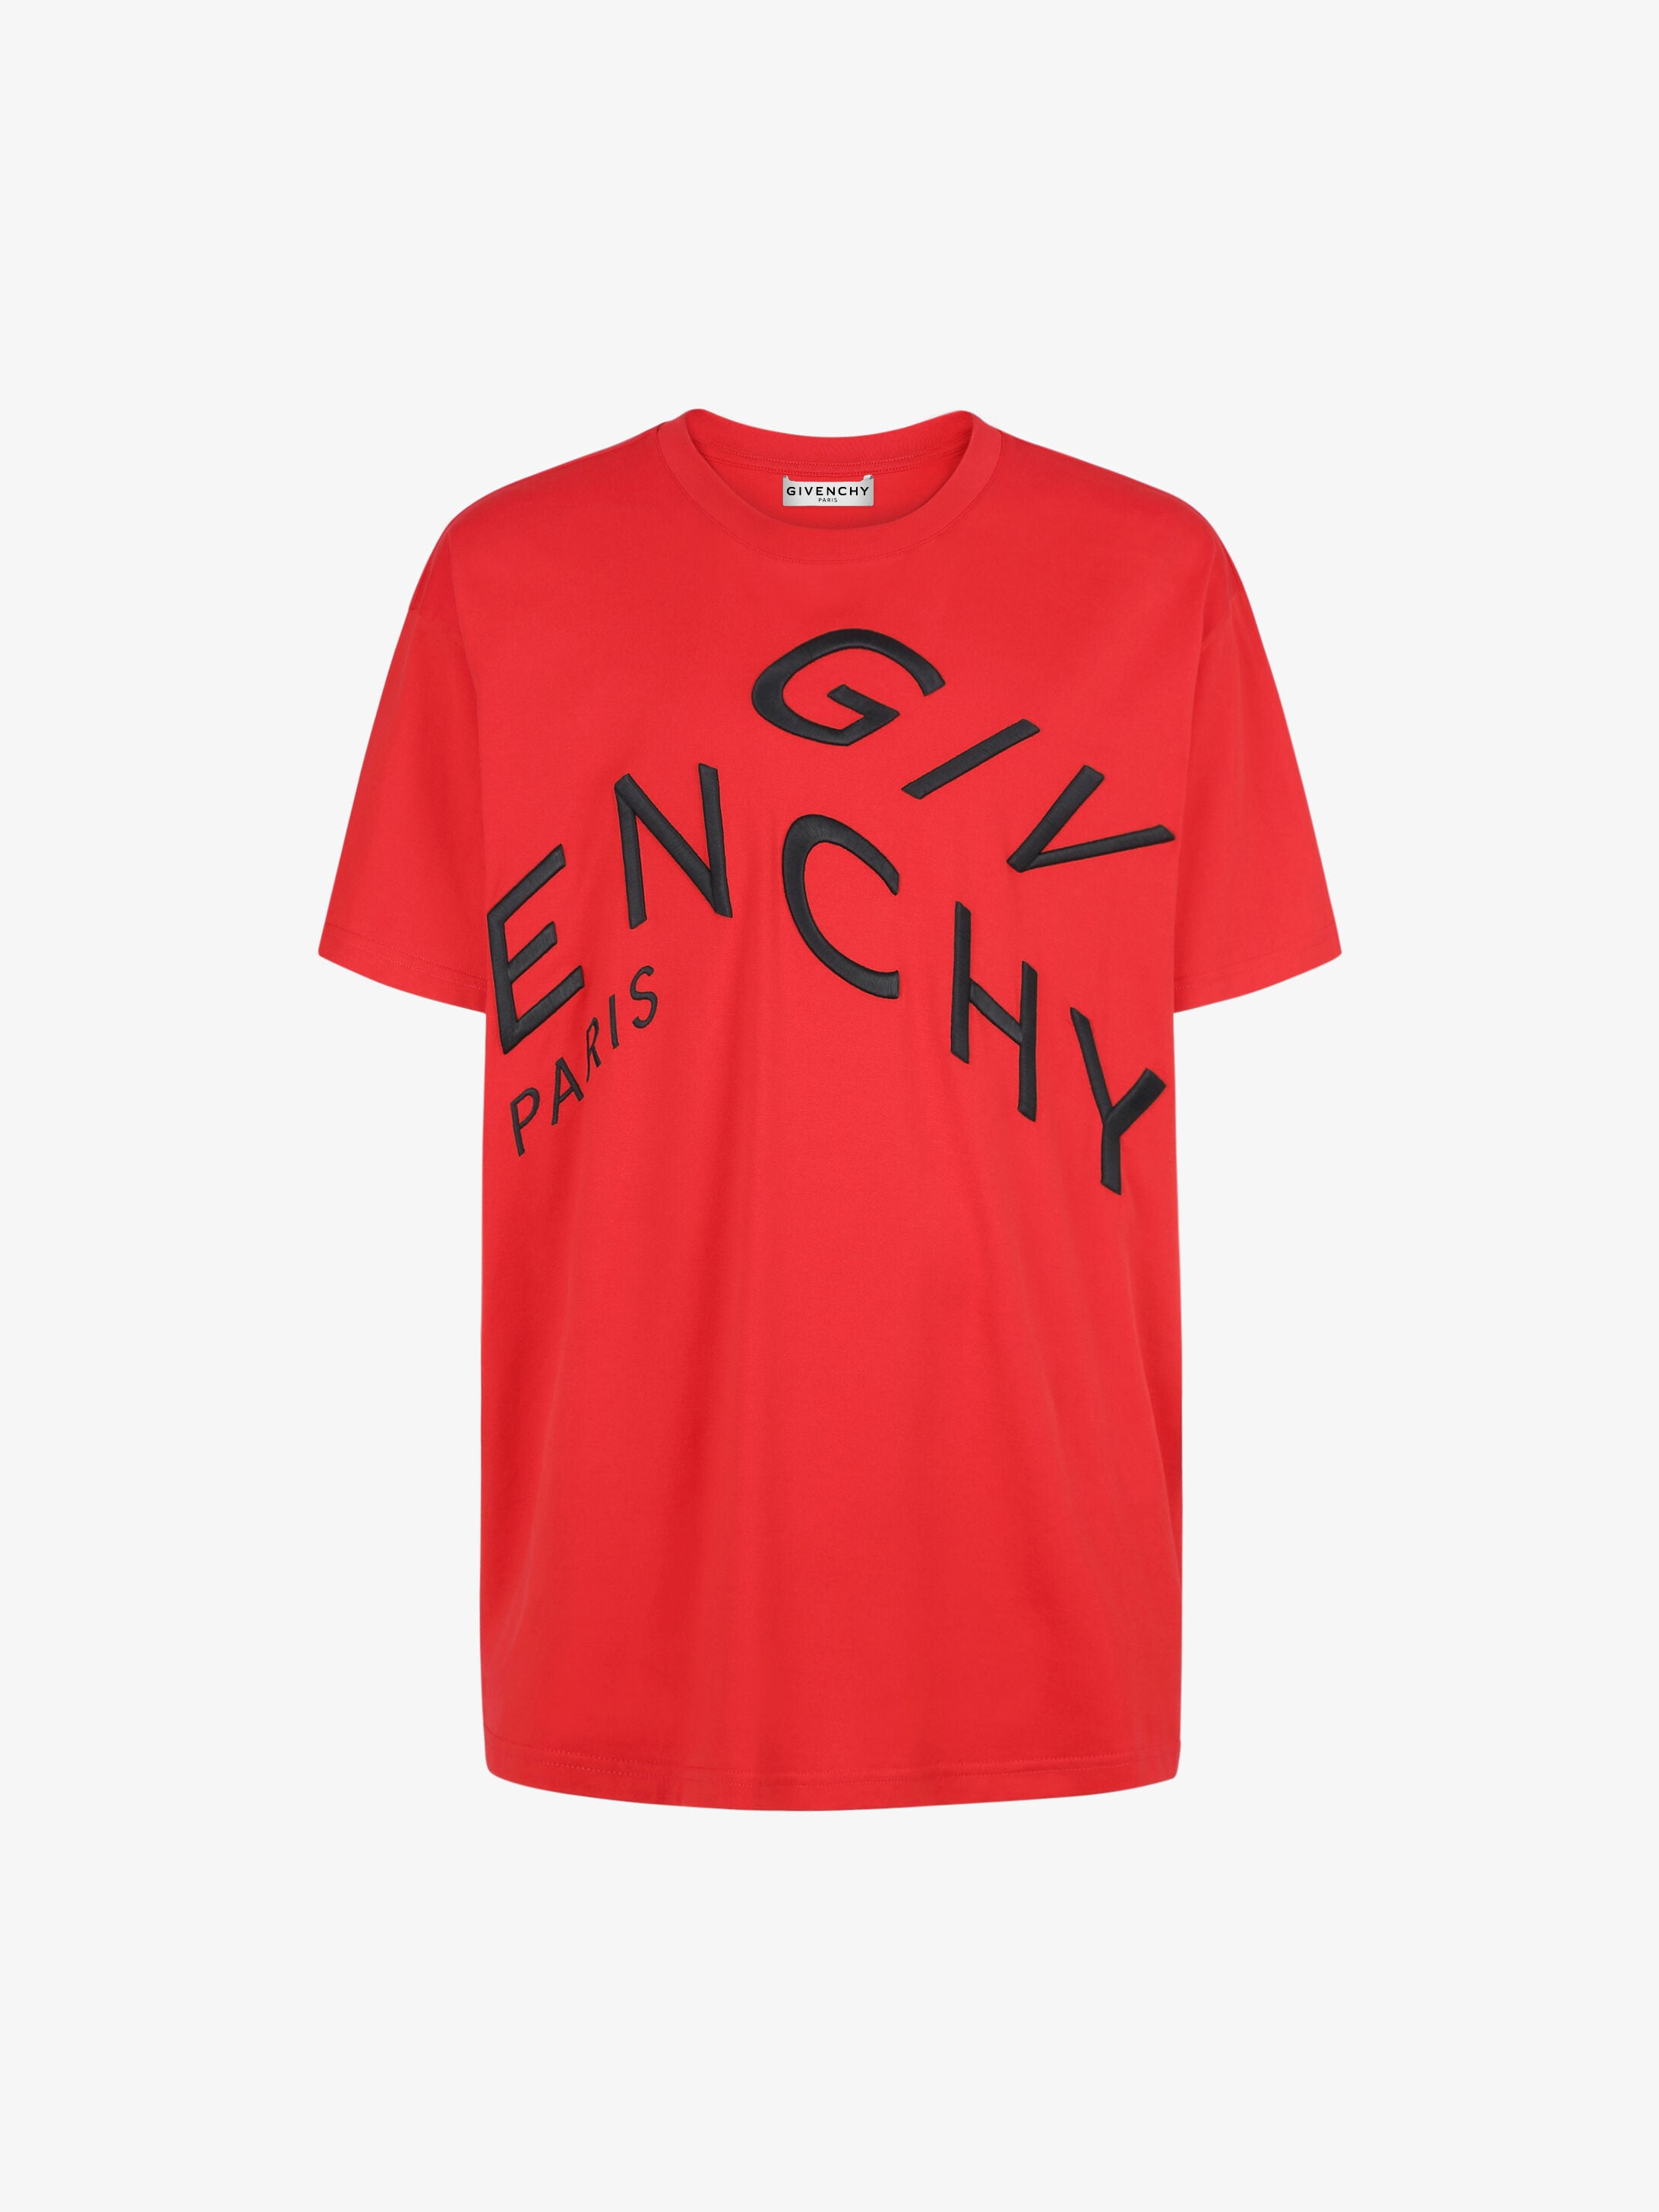 givenchy t shirt for men